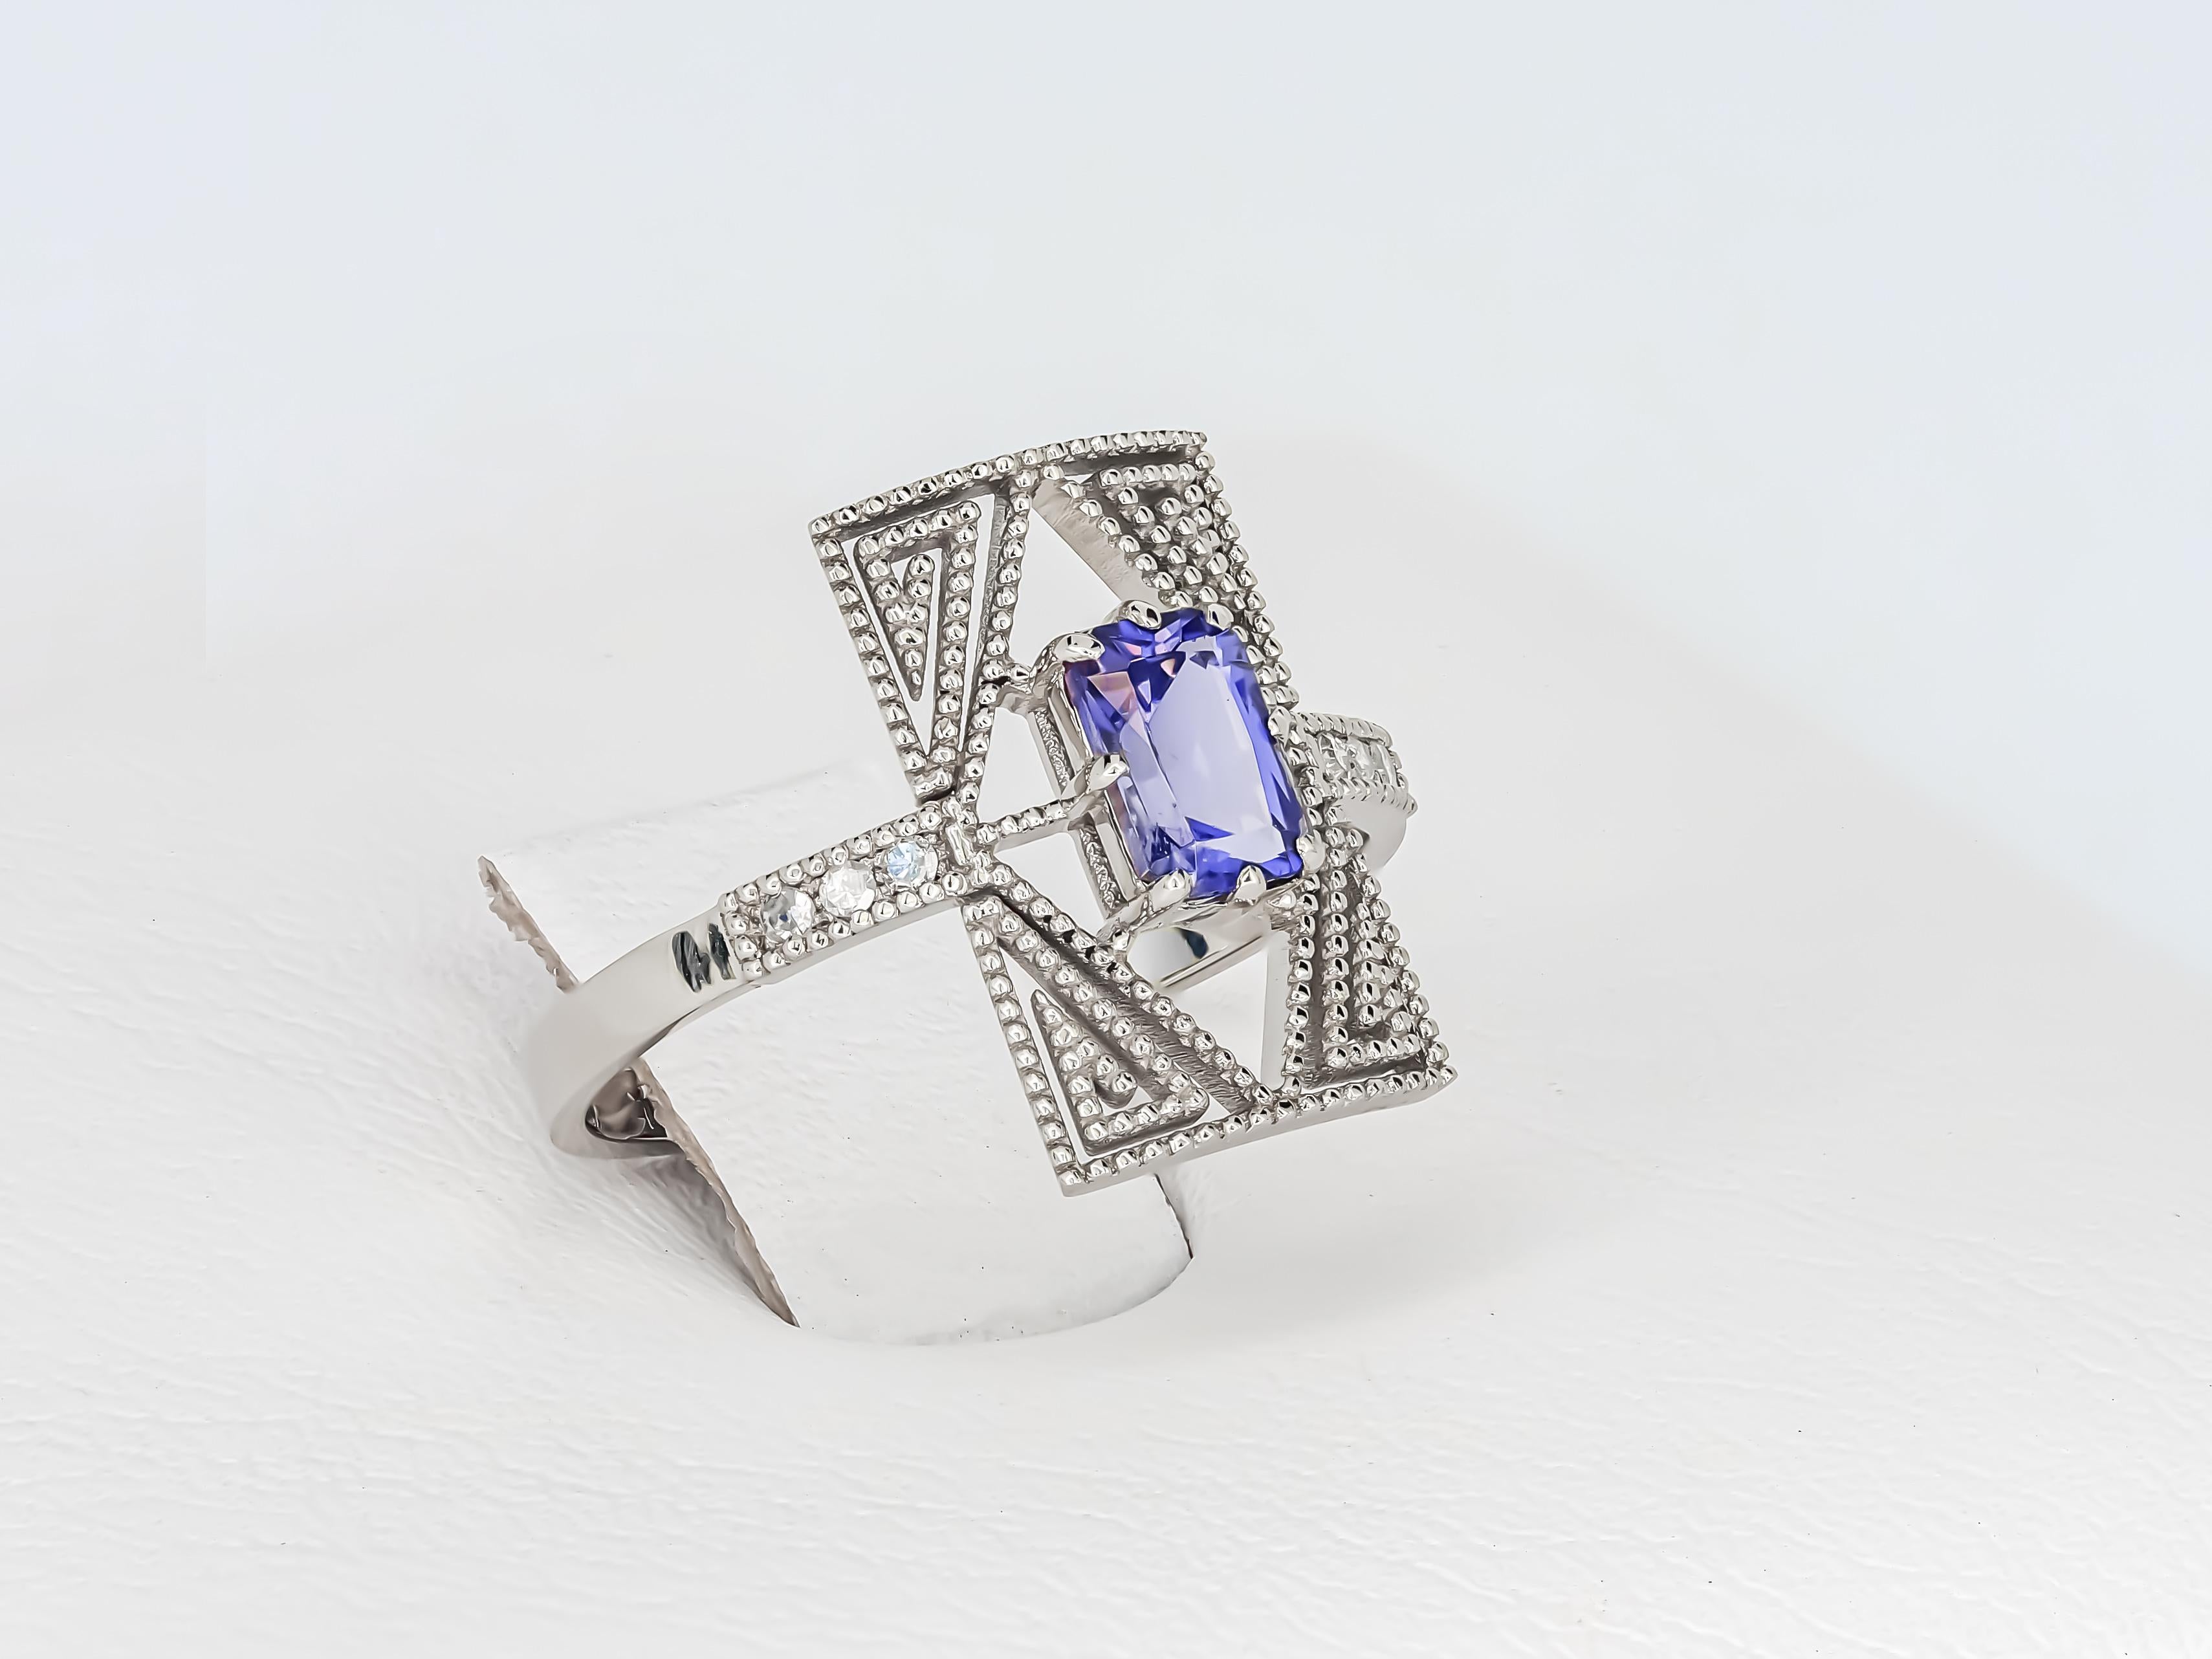 Ring with spinel and diamonds.
14 kt white gold
Weight: 2.08 g.
Size:17.2 mm. (US - 7, UK - O, FR - 54)

Central stone: Spinel
Weight : approx 0.80 ct in total (6 x 4 mm)
Emerald cut, color - blue
Clarity: Transparent with inclusions
Diamonds: